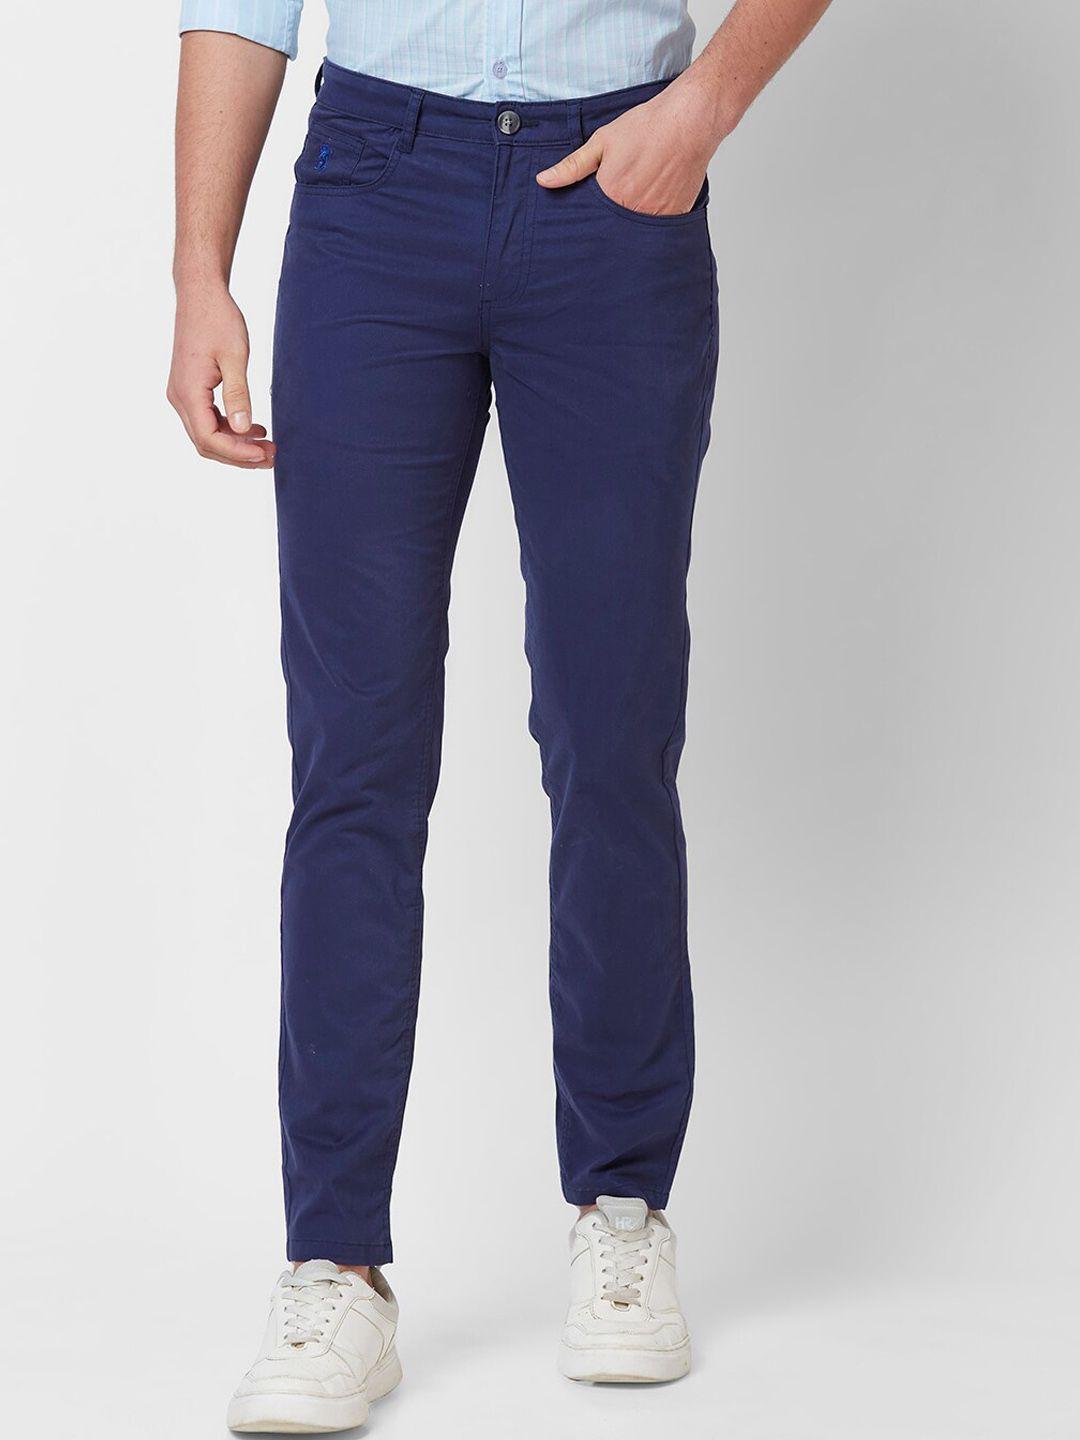 giordano men blue slim fit chinos trousers